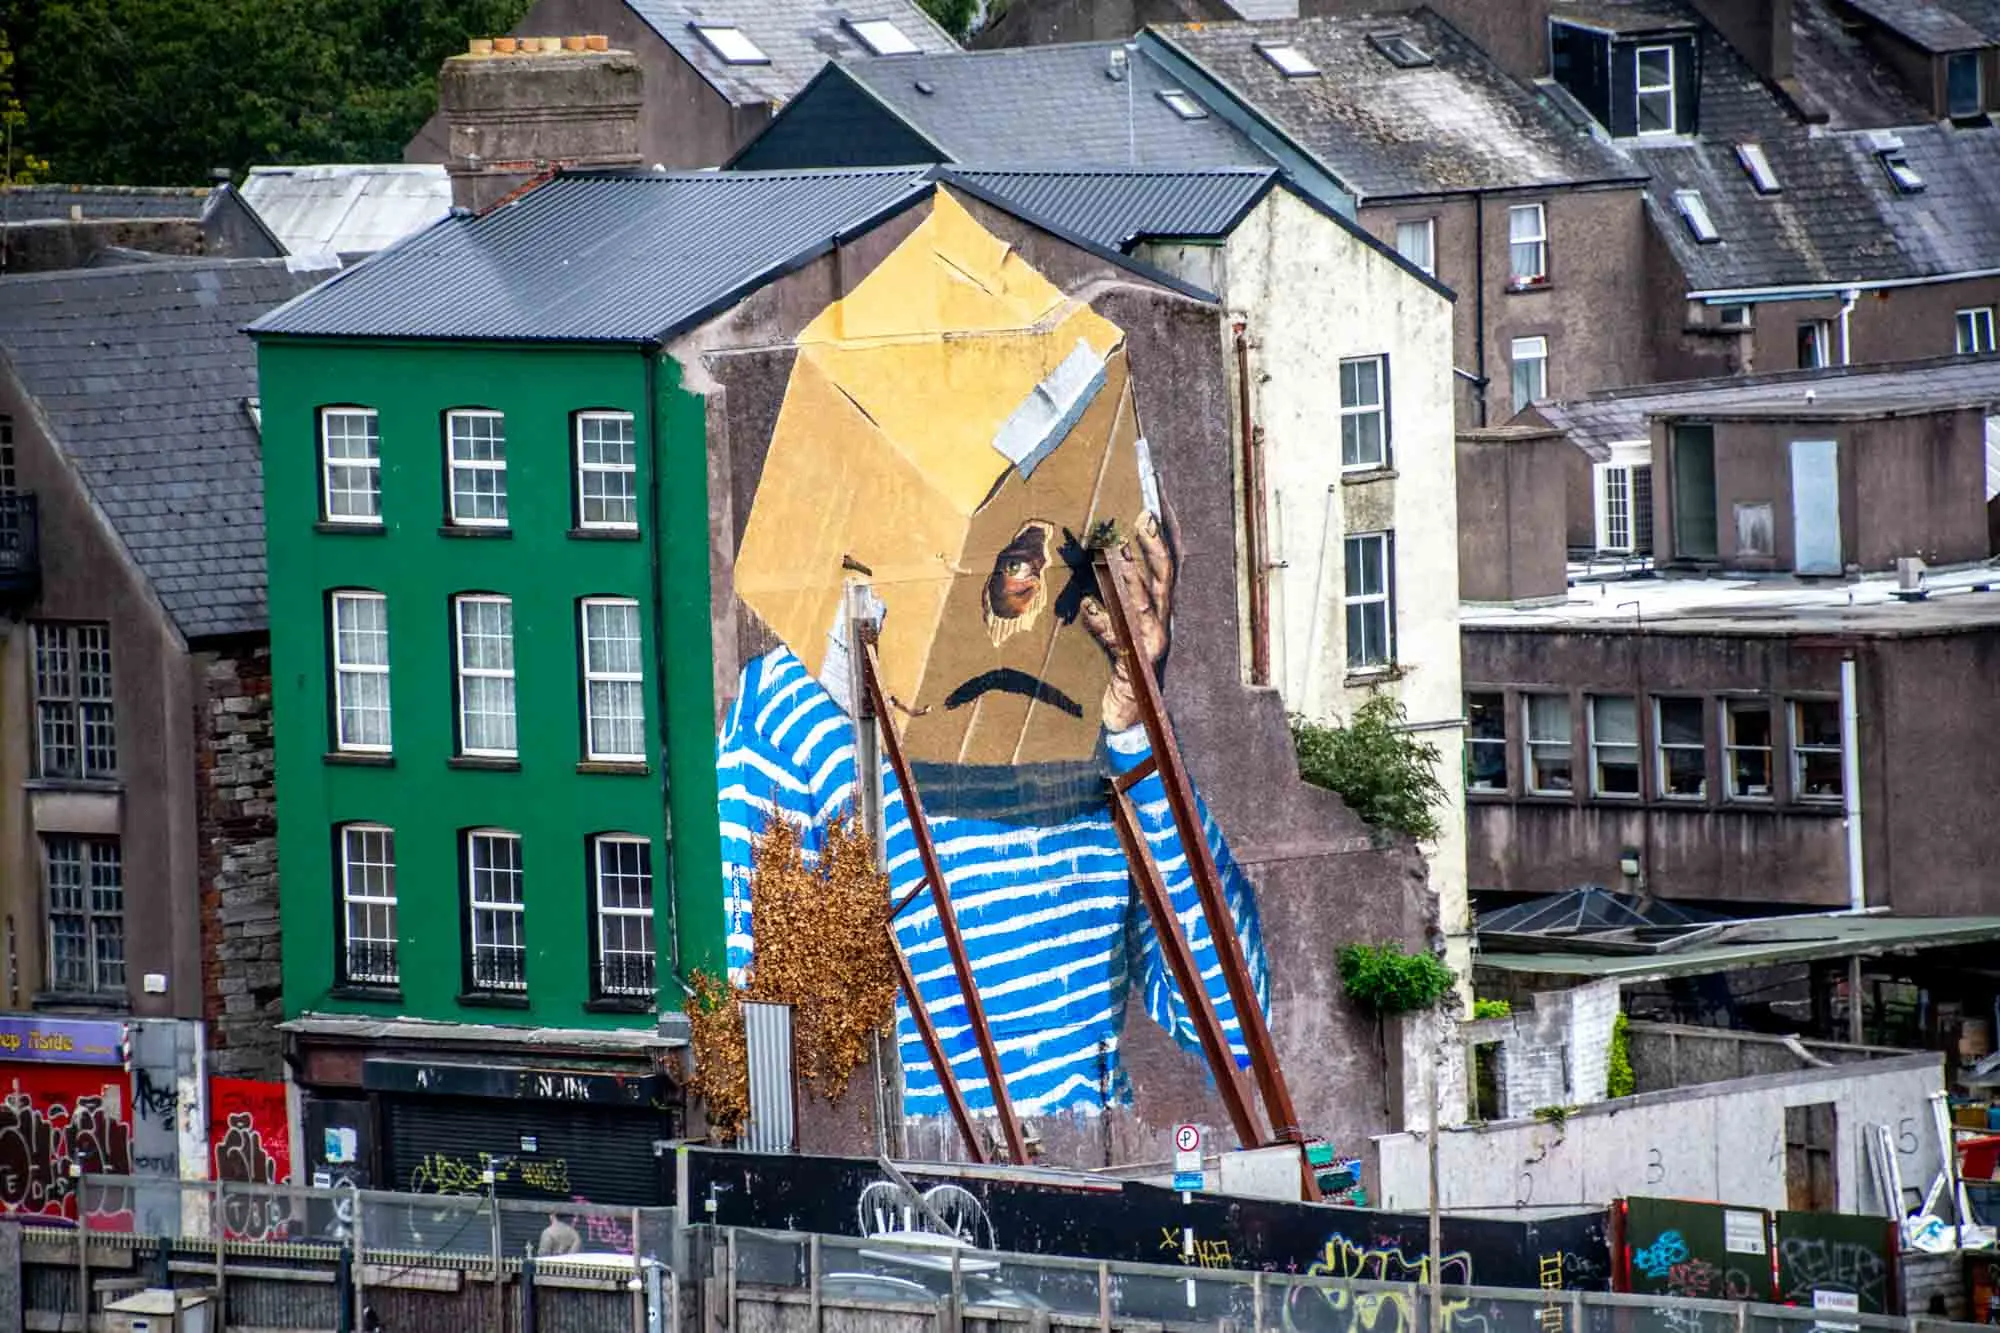 Street art mural of a person with a box on their head and one eye hole cut out